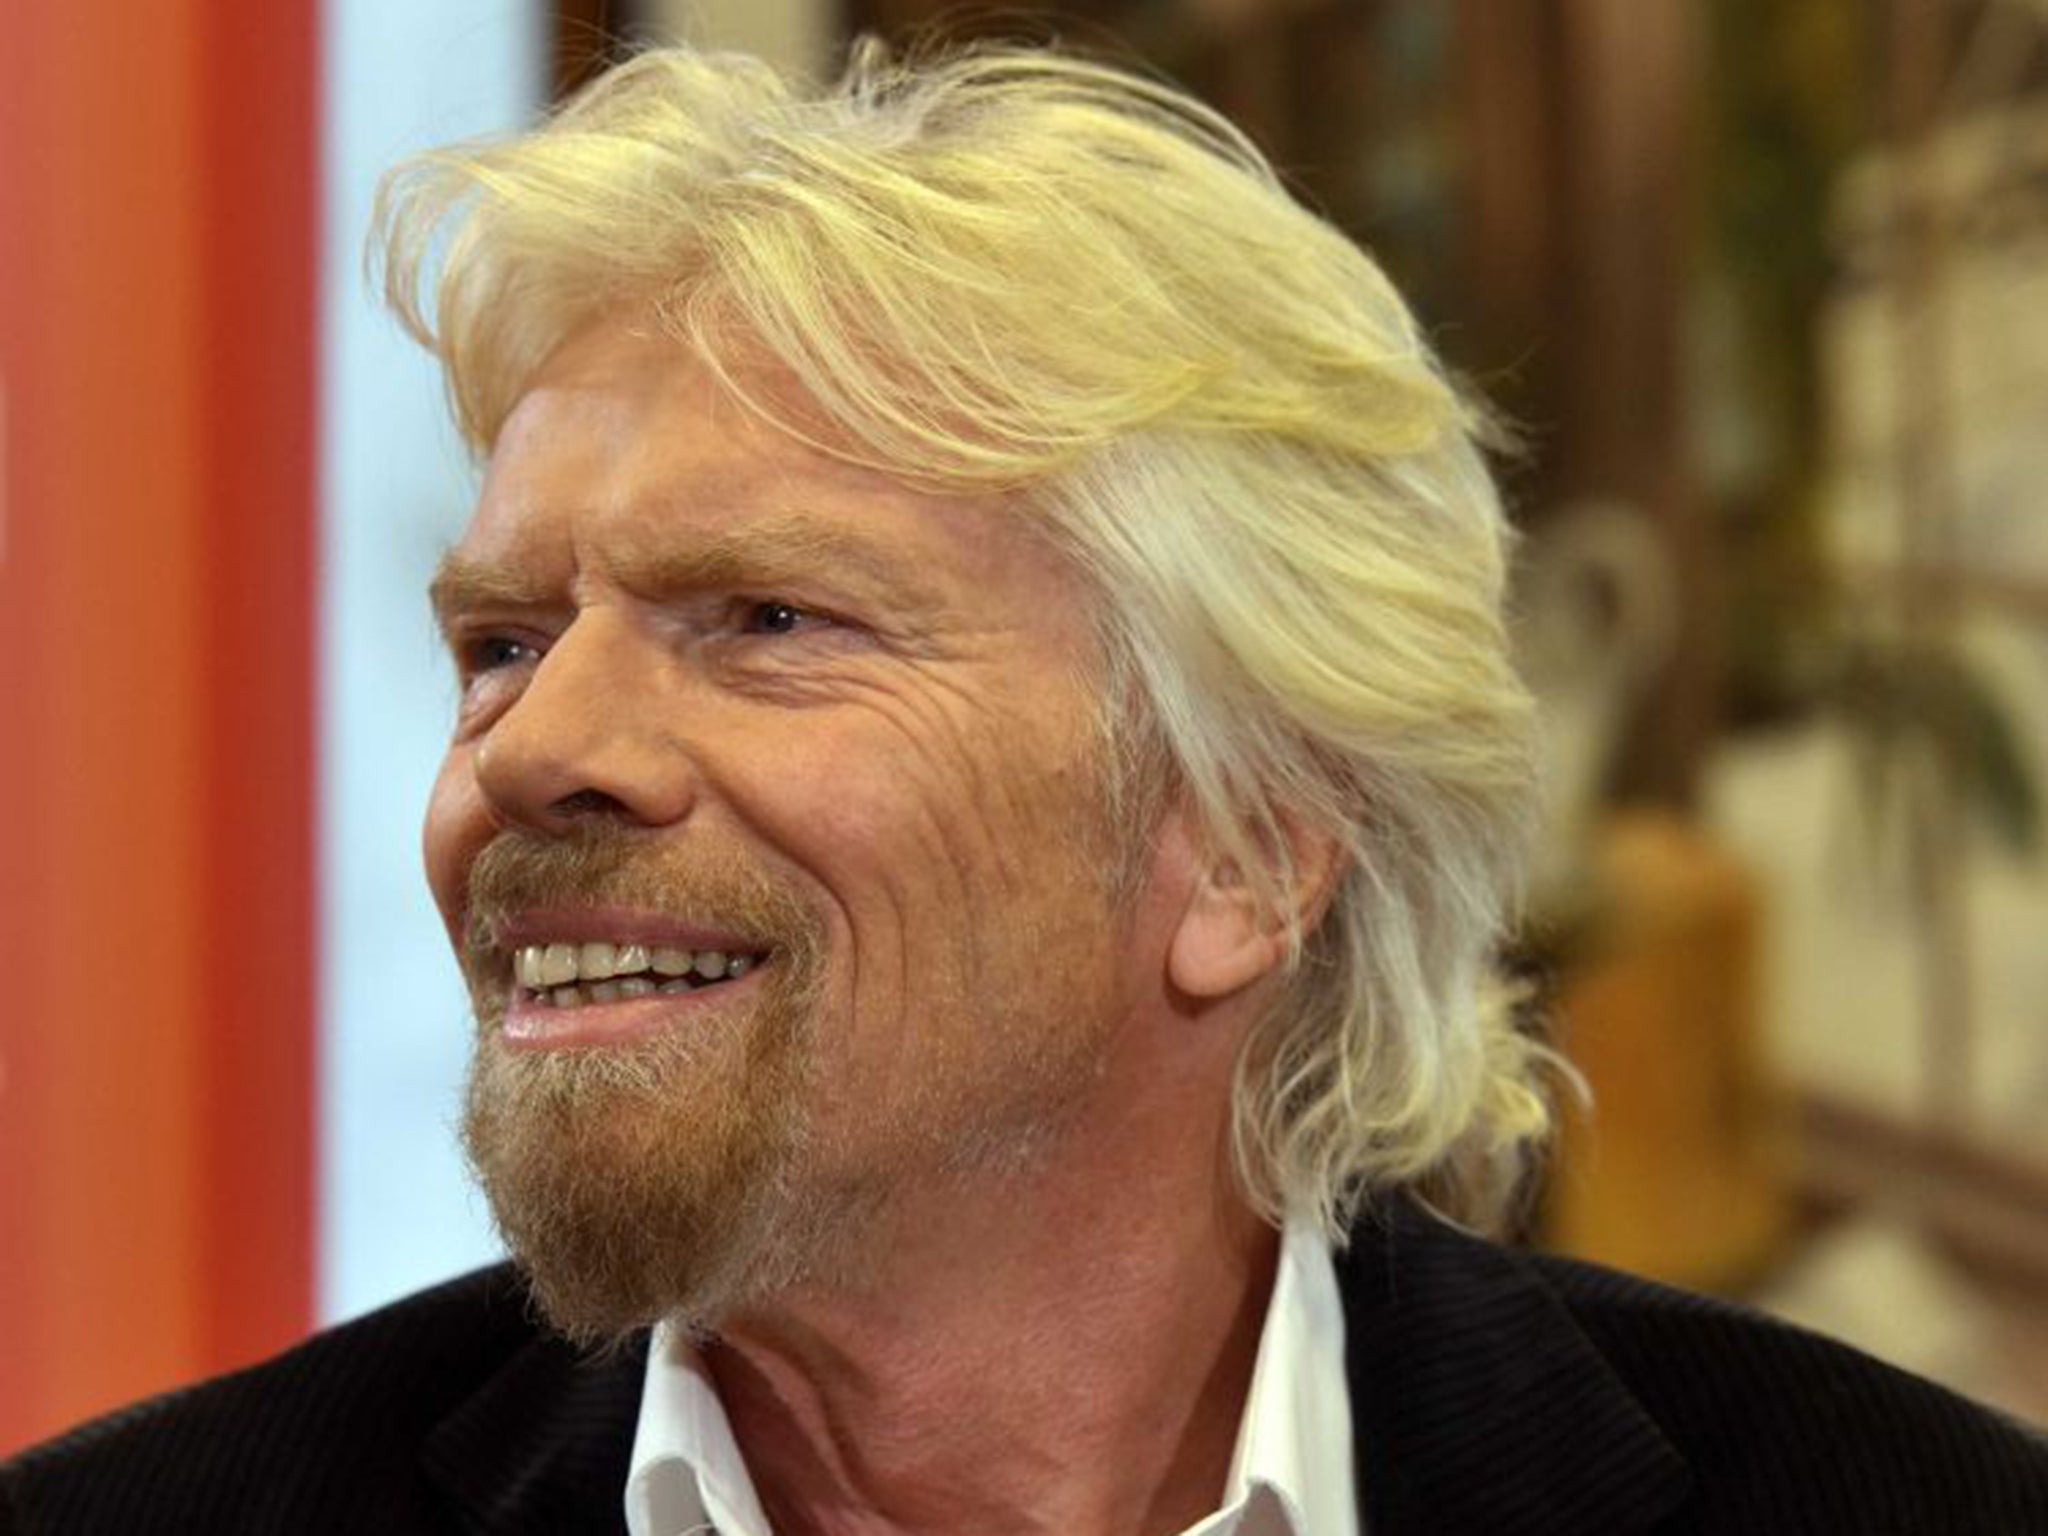 Sir Richard Branson was speaking on the BBC’s Andrew Marr Show